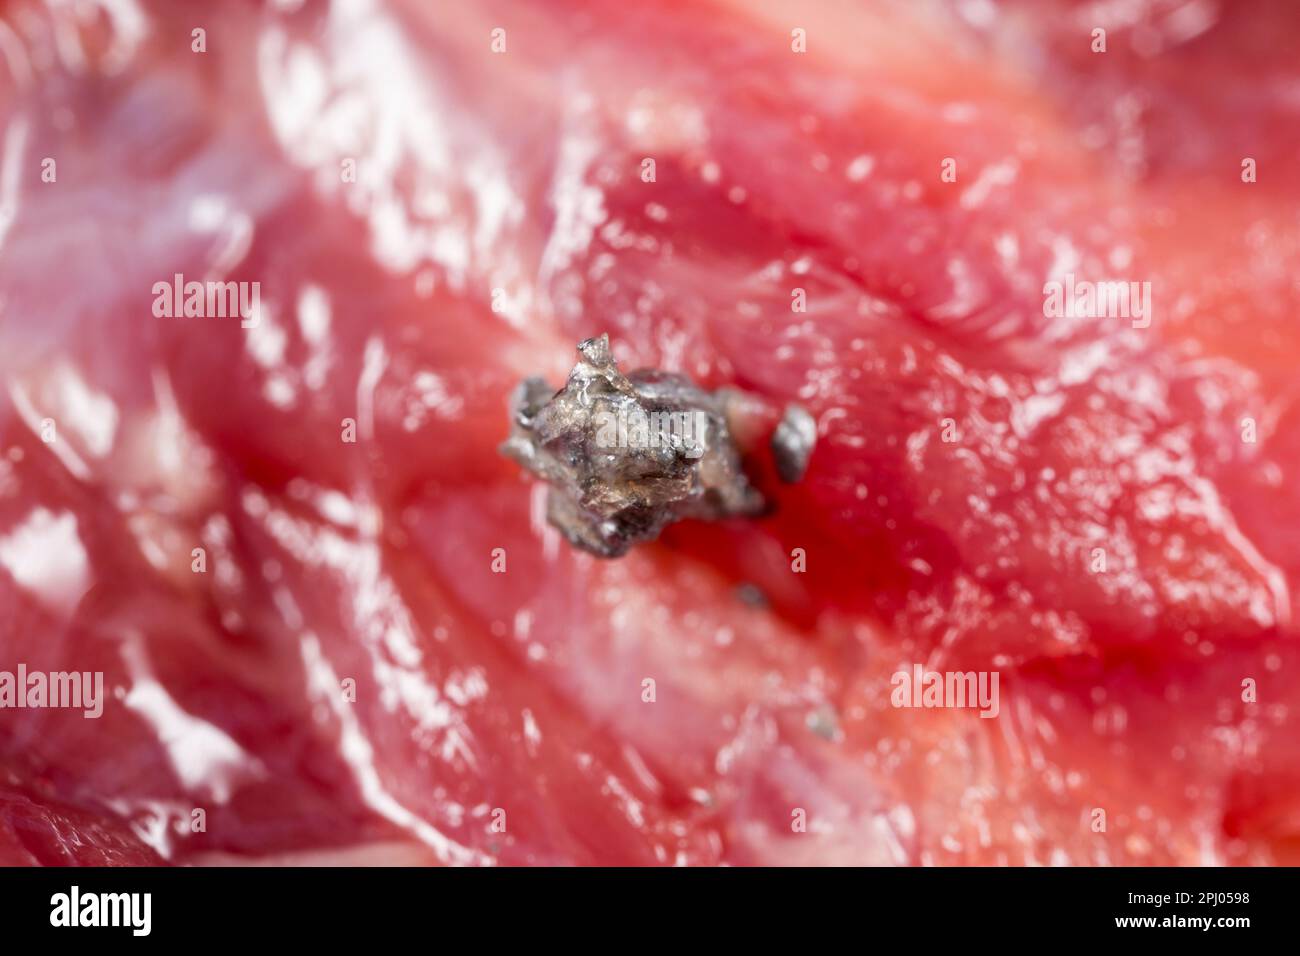 Fragments of lead from an expanding lead rifle bullet in the shoulder meat of a wild boar shot as part of a managemant plan to control their numbers i Stock Photo